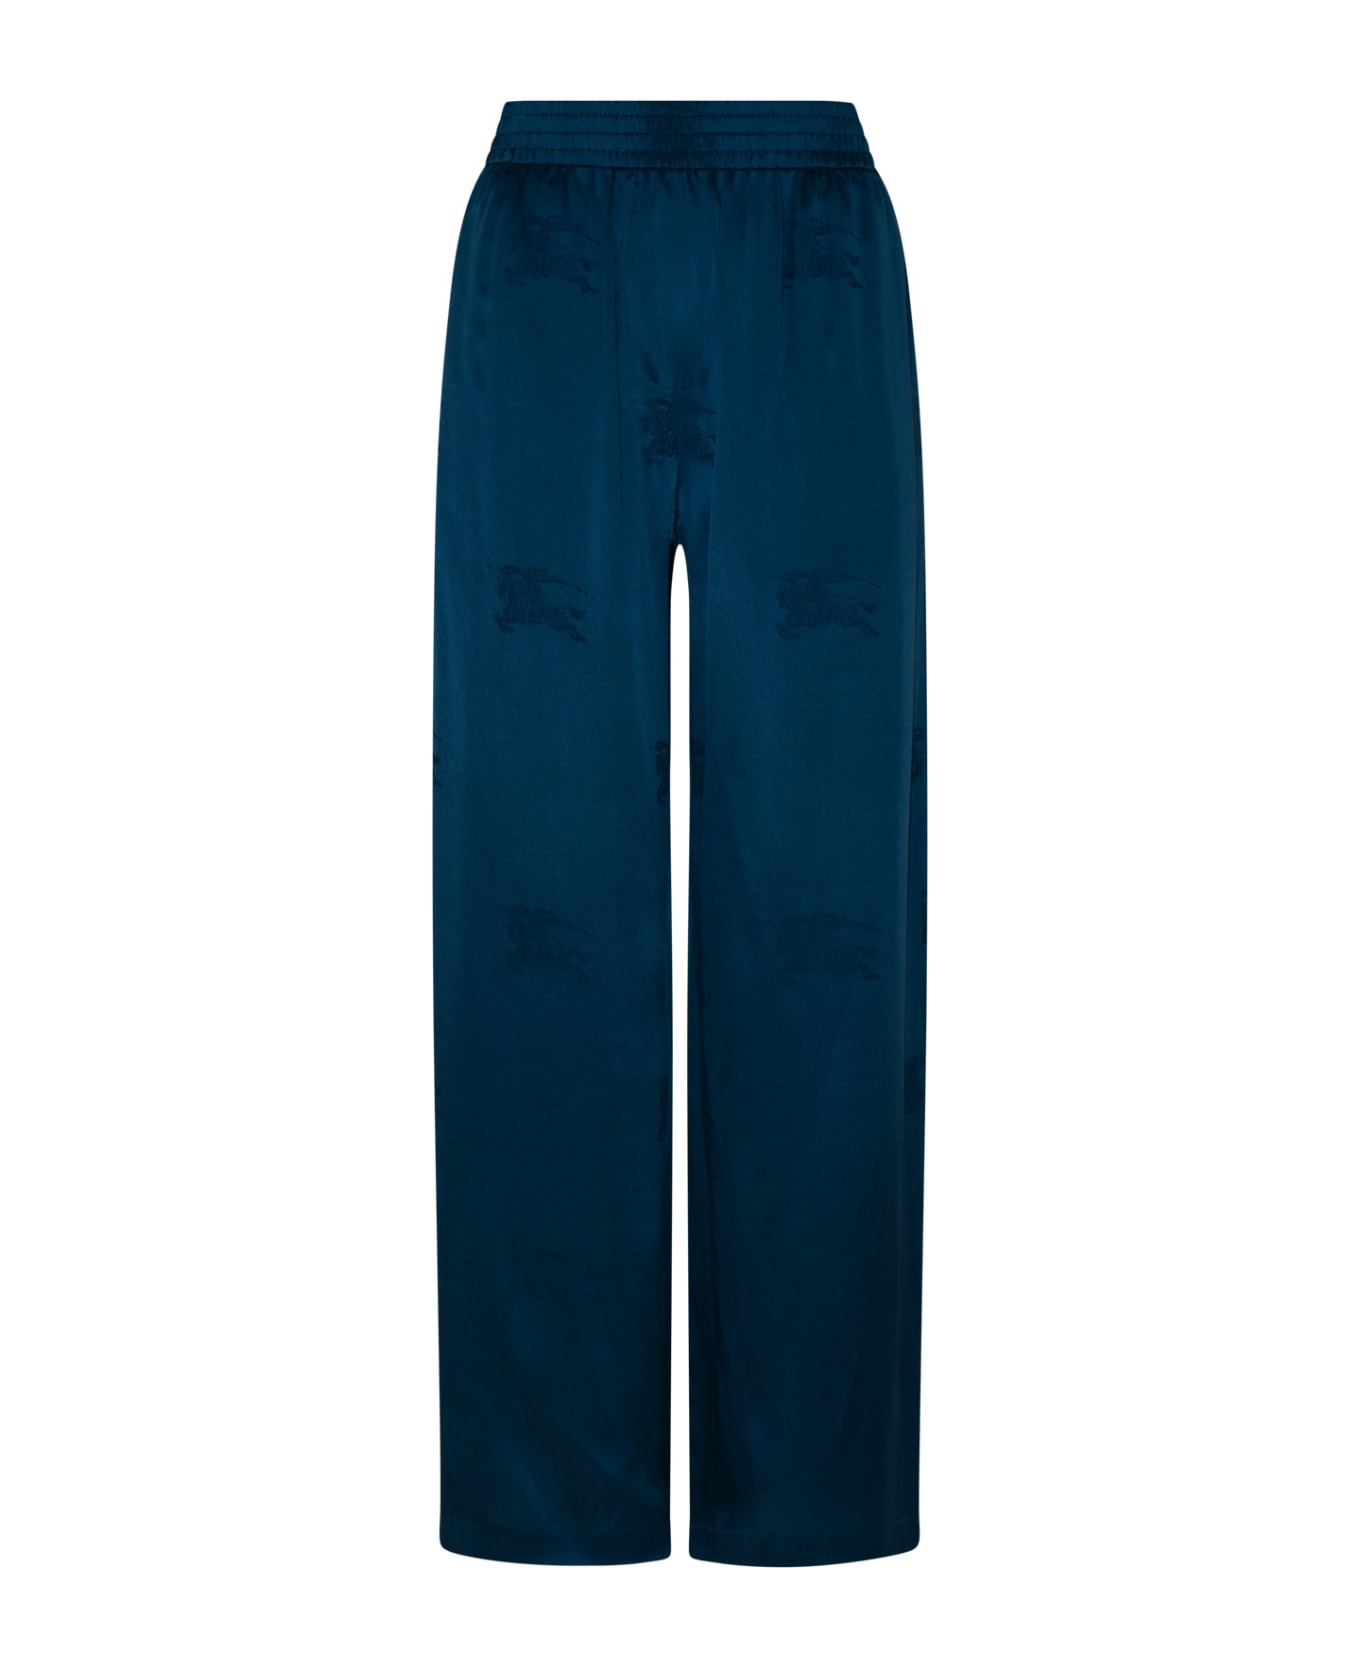 Burberry Unsead Navy Silk Pants - Muted navy ip pat ボトムス